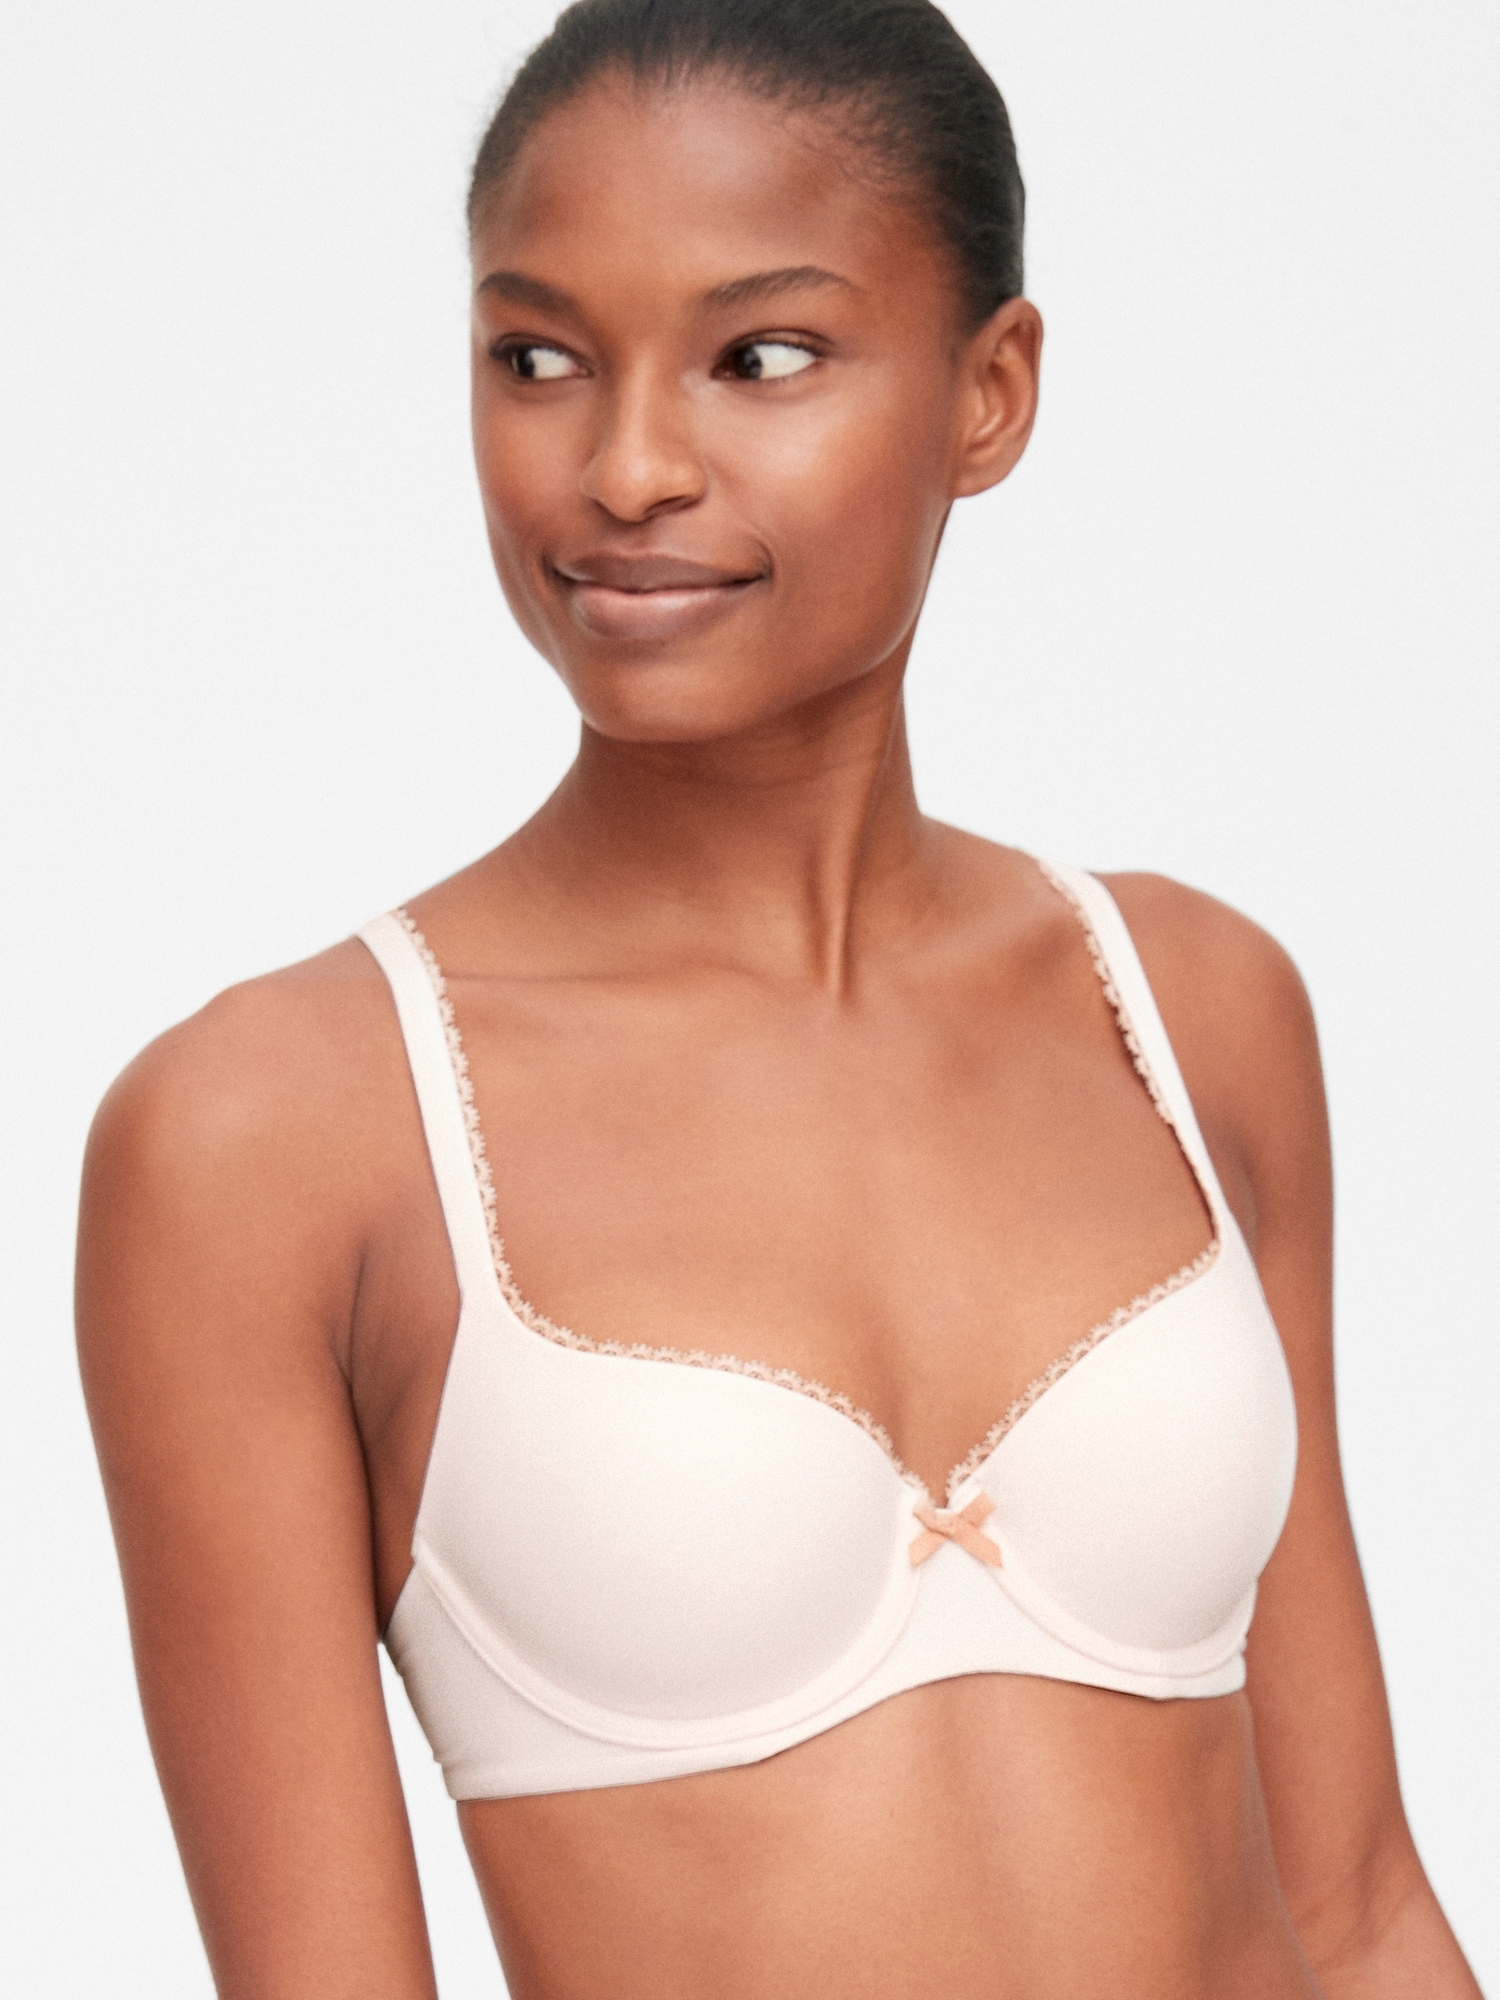 Our Sheer Instinct demi bra has seamless, lightly lined, contouring cups.  Airy, sheer, stretch gossamer ribbon over plush straps and at…